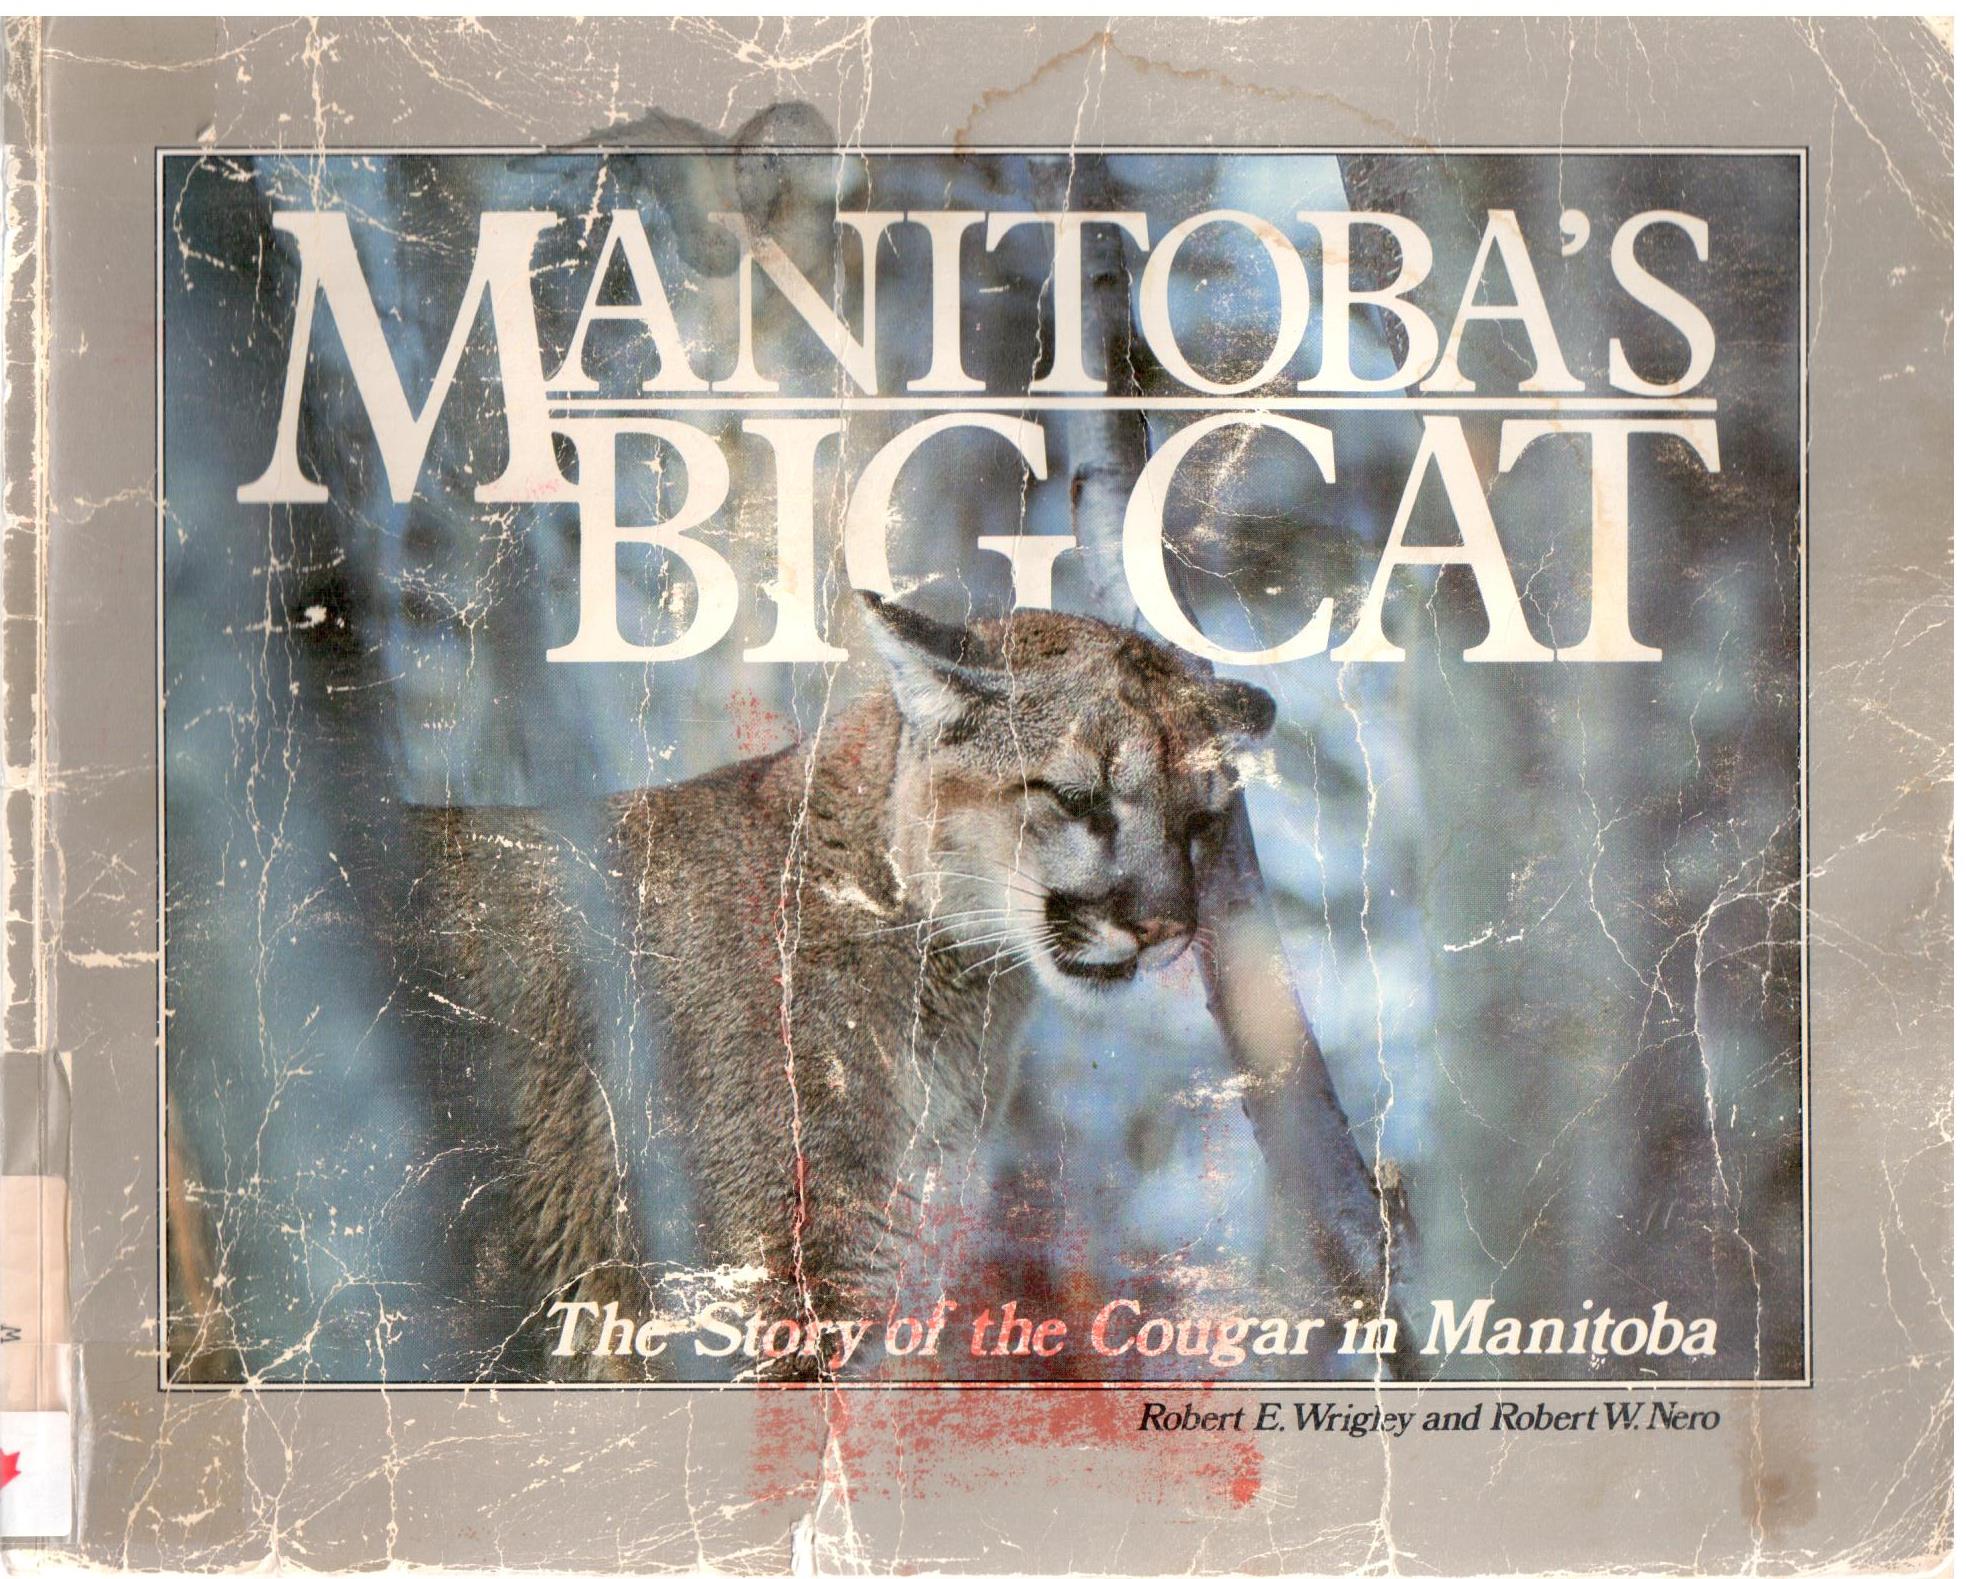 Manitoba's big cat : the story of the cougar in Manitoba